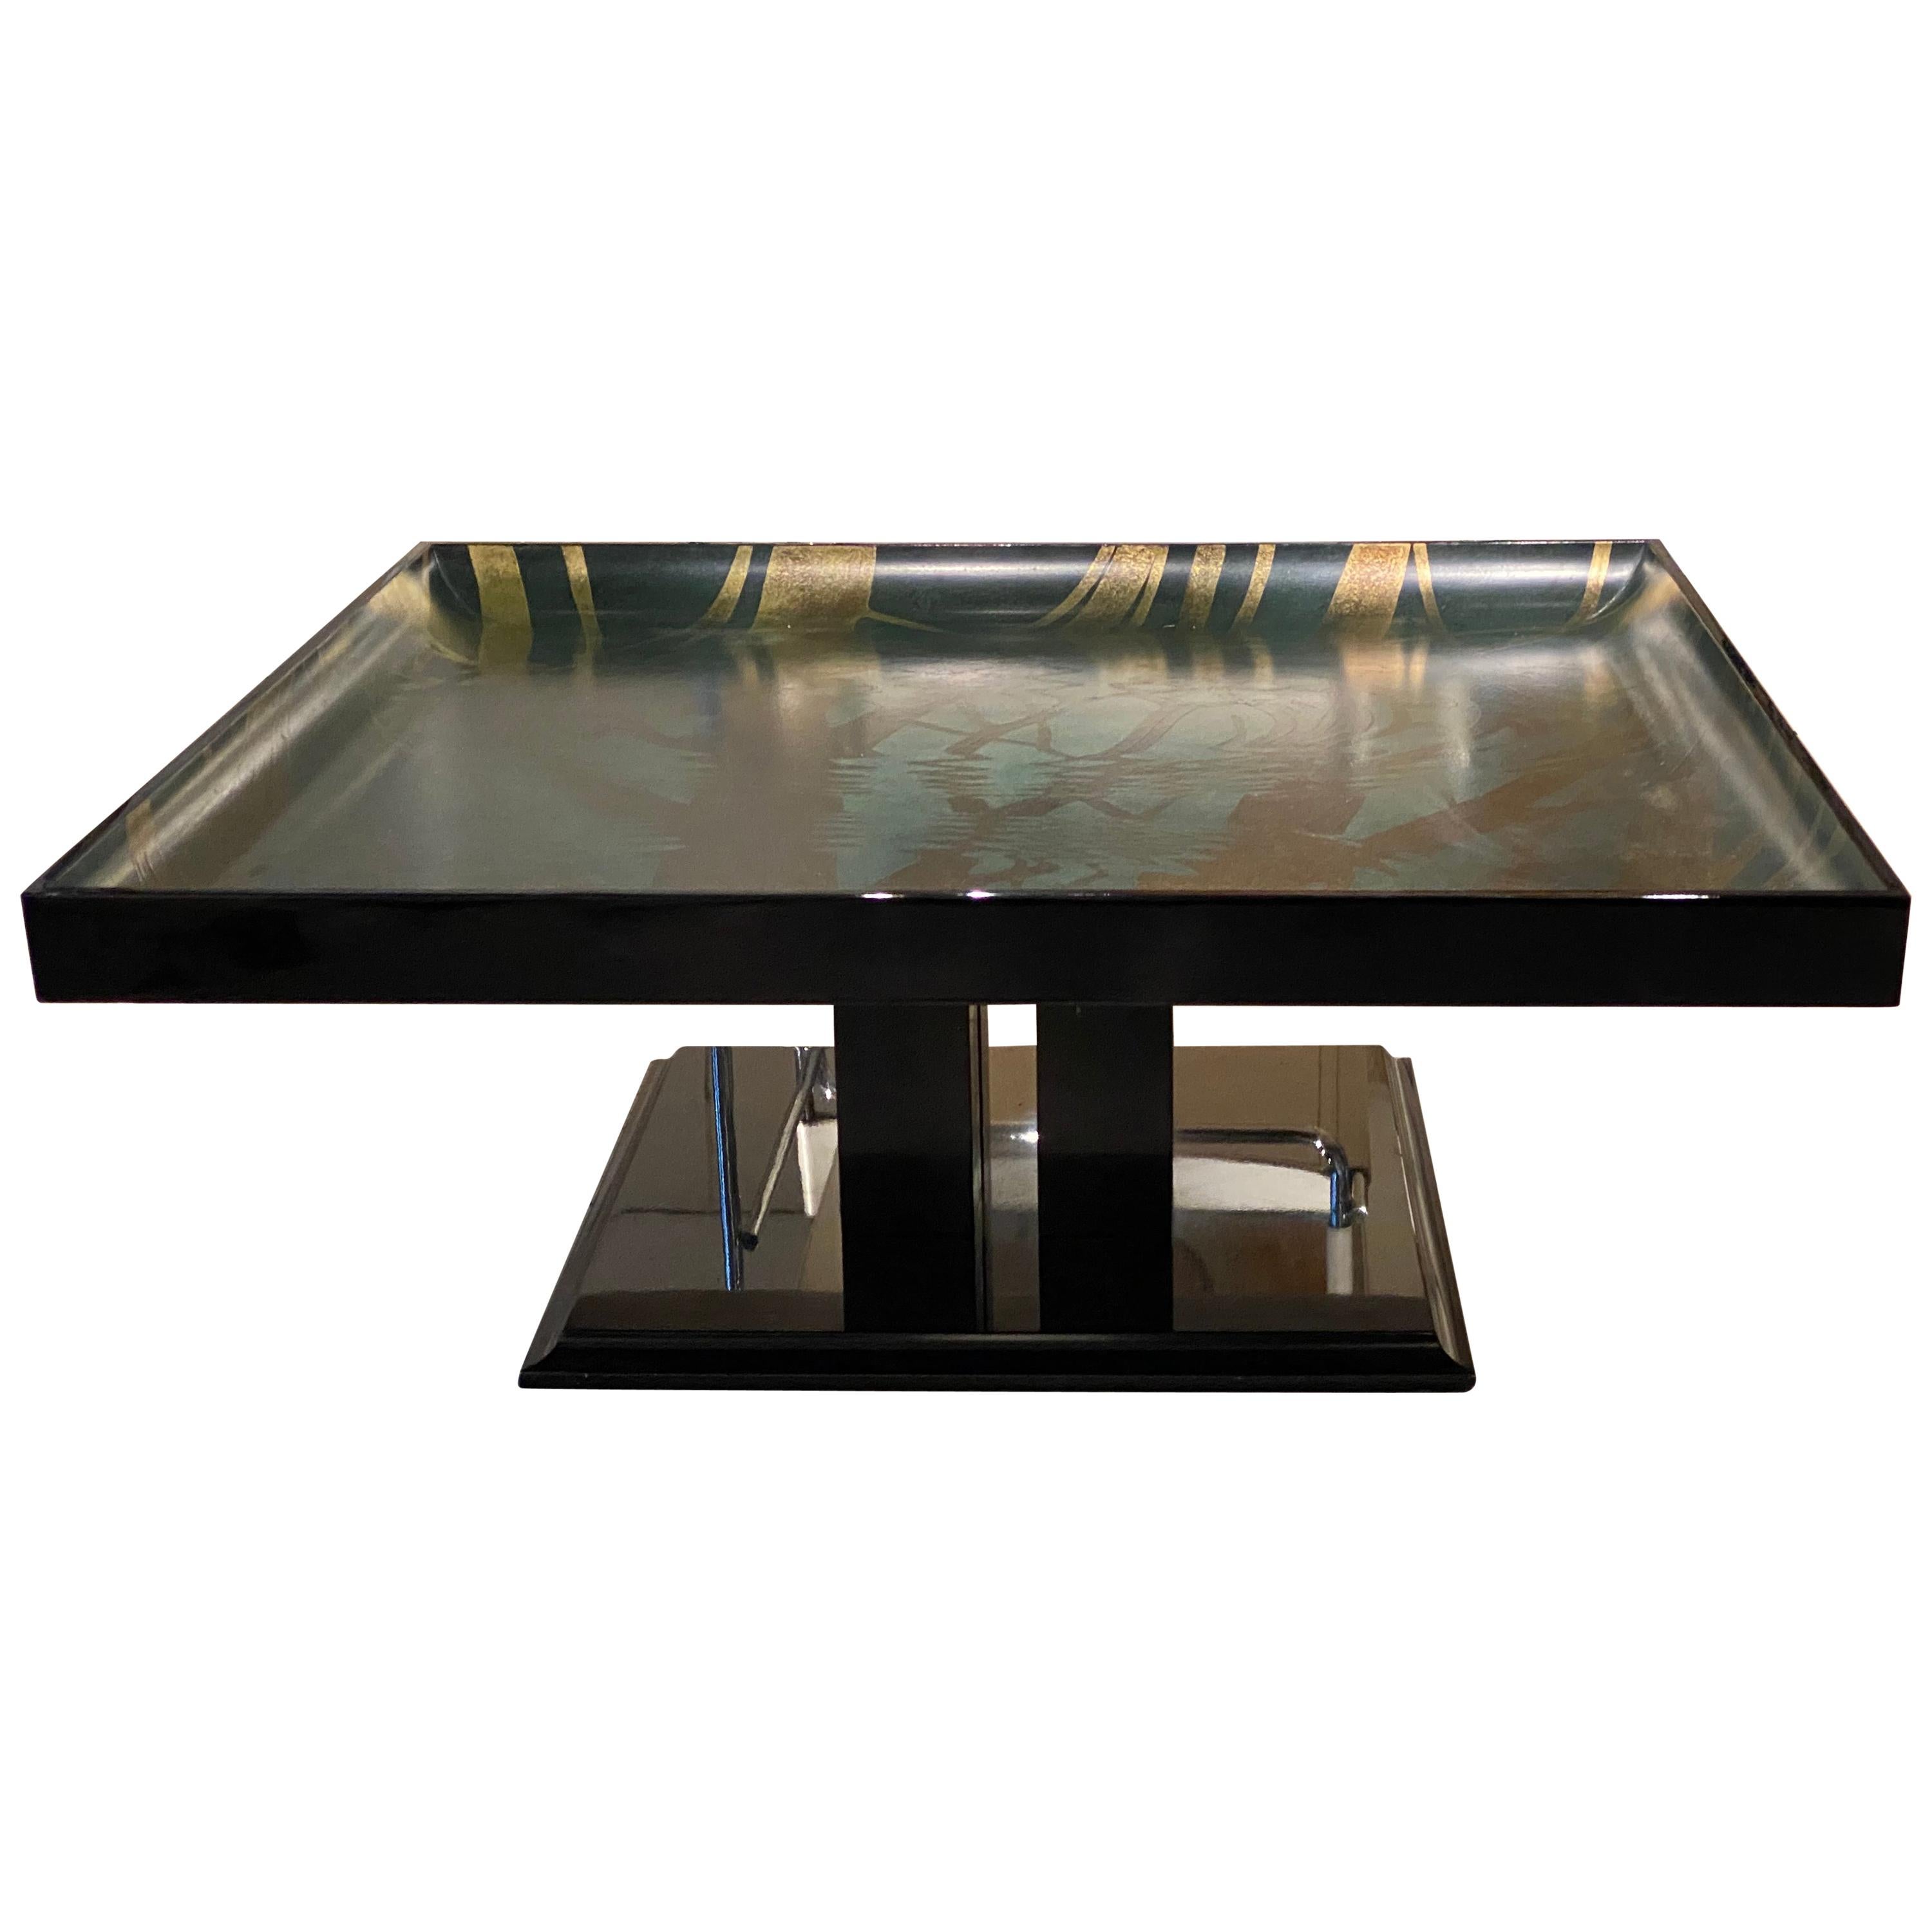 Splendid Black Lacquered Table Rippled Surface, Painting "after" M. C. Escher 